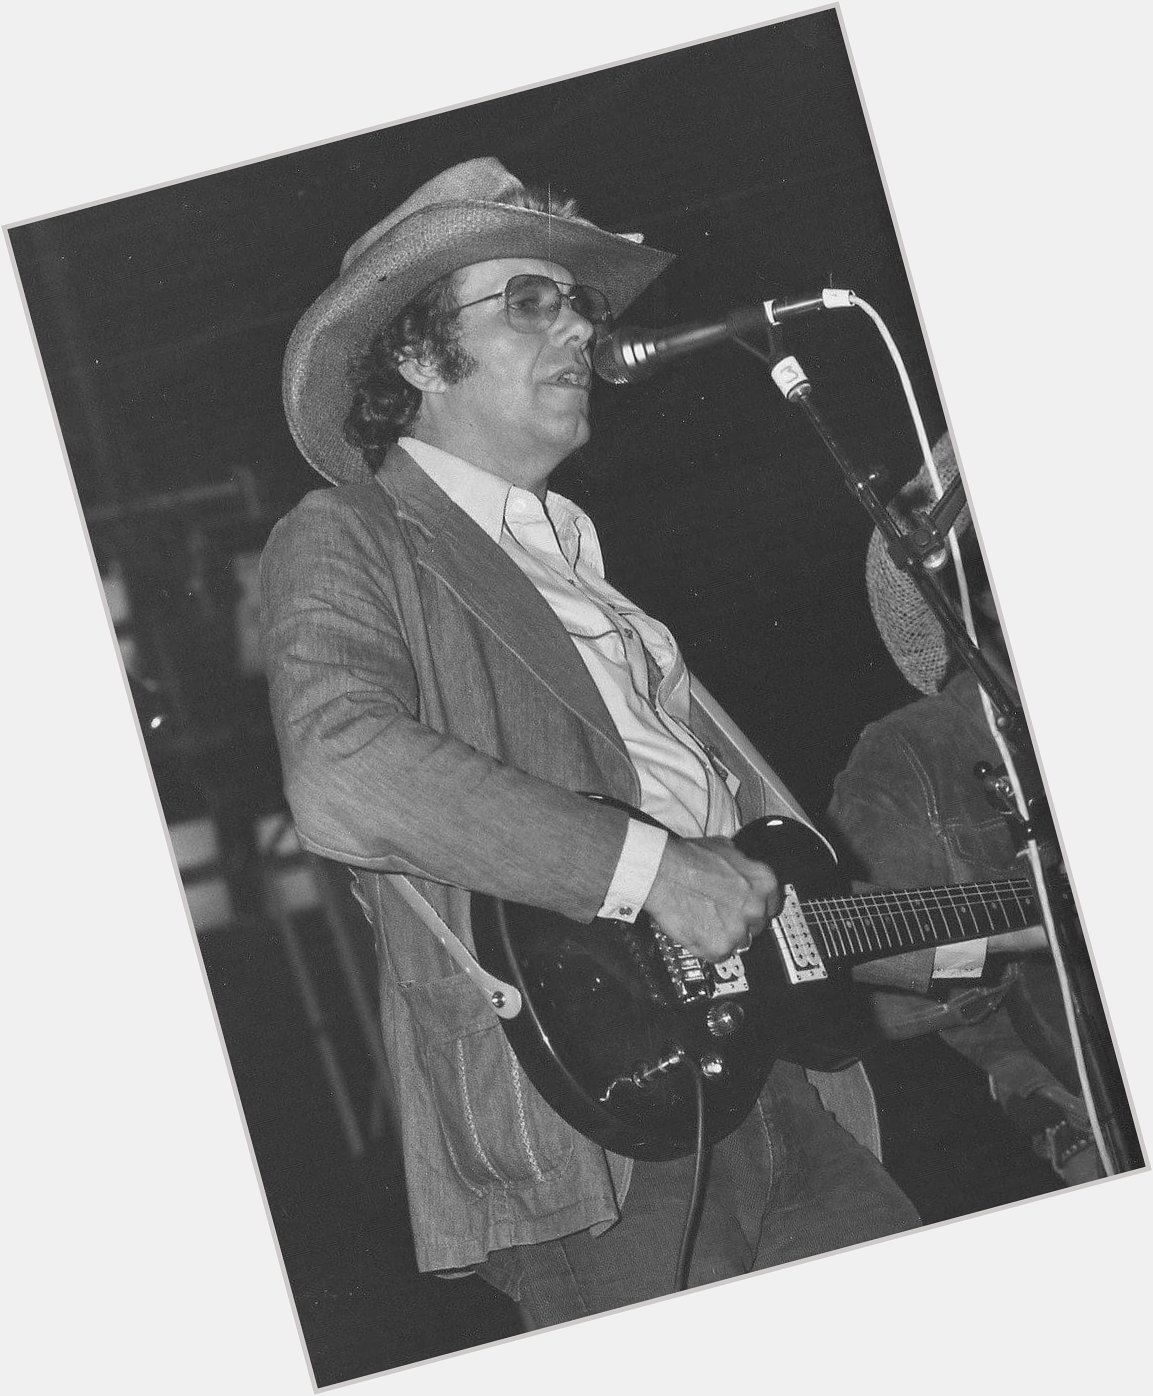  Happy Birthday, Bobby Bare!
*Born on this day in 1935* 